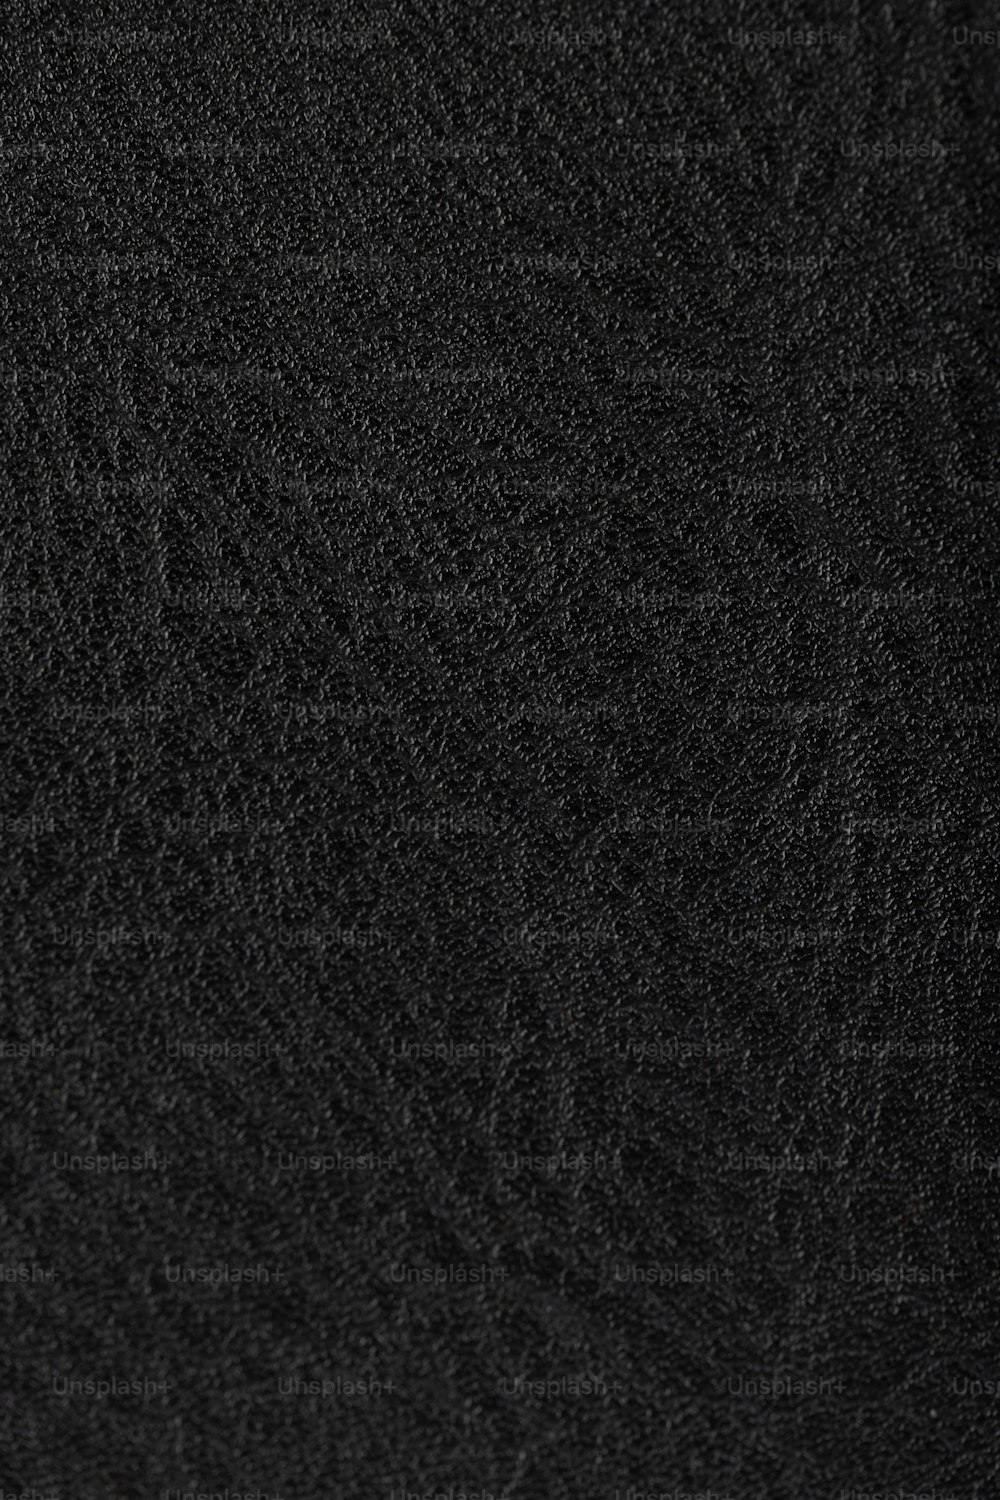 Leather background texture for craft and leatherworking projects